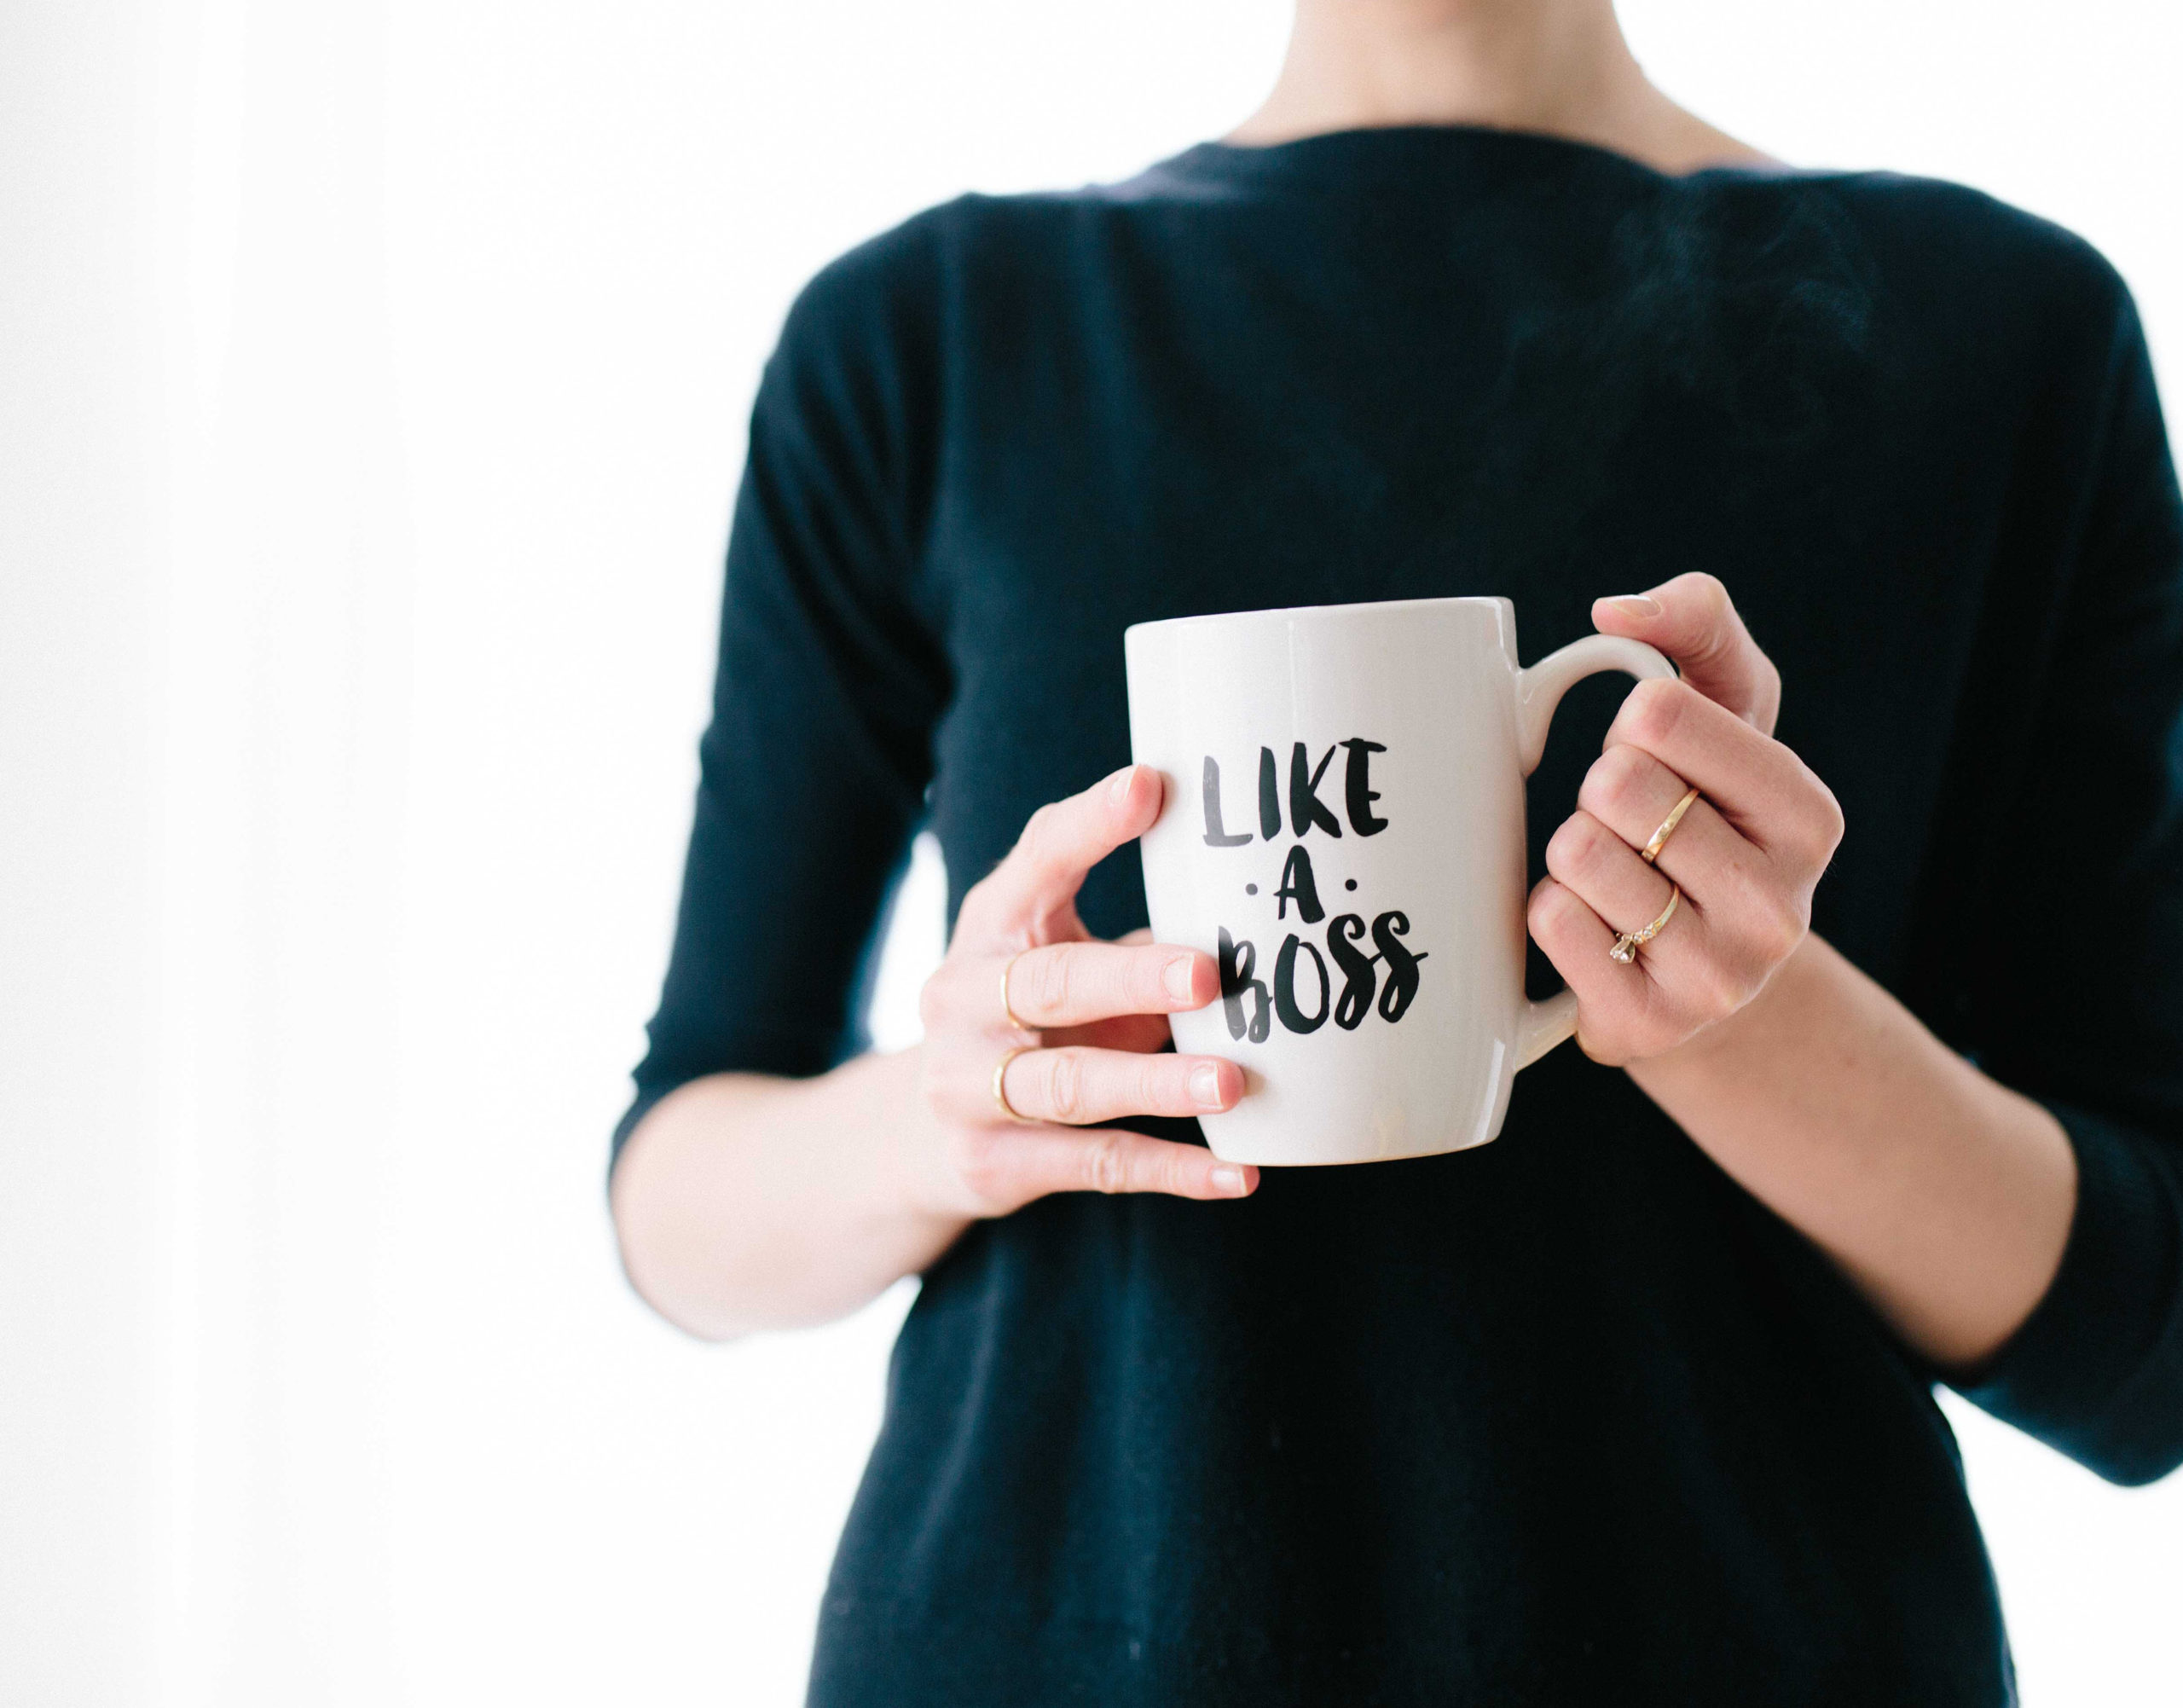 Woman Holding "Like A Boss" Coffee Mug, What We'd Be Working On Right Now if I were Your COO, Q1 2021 edition